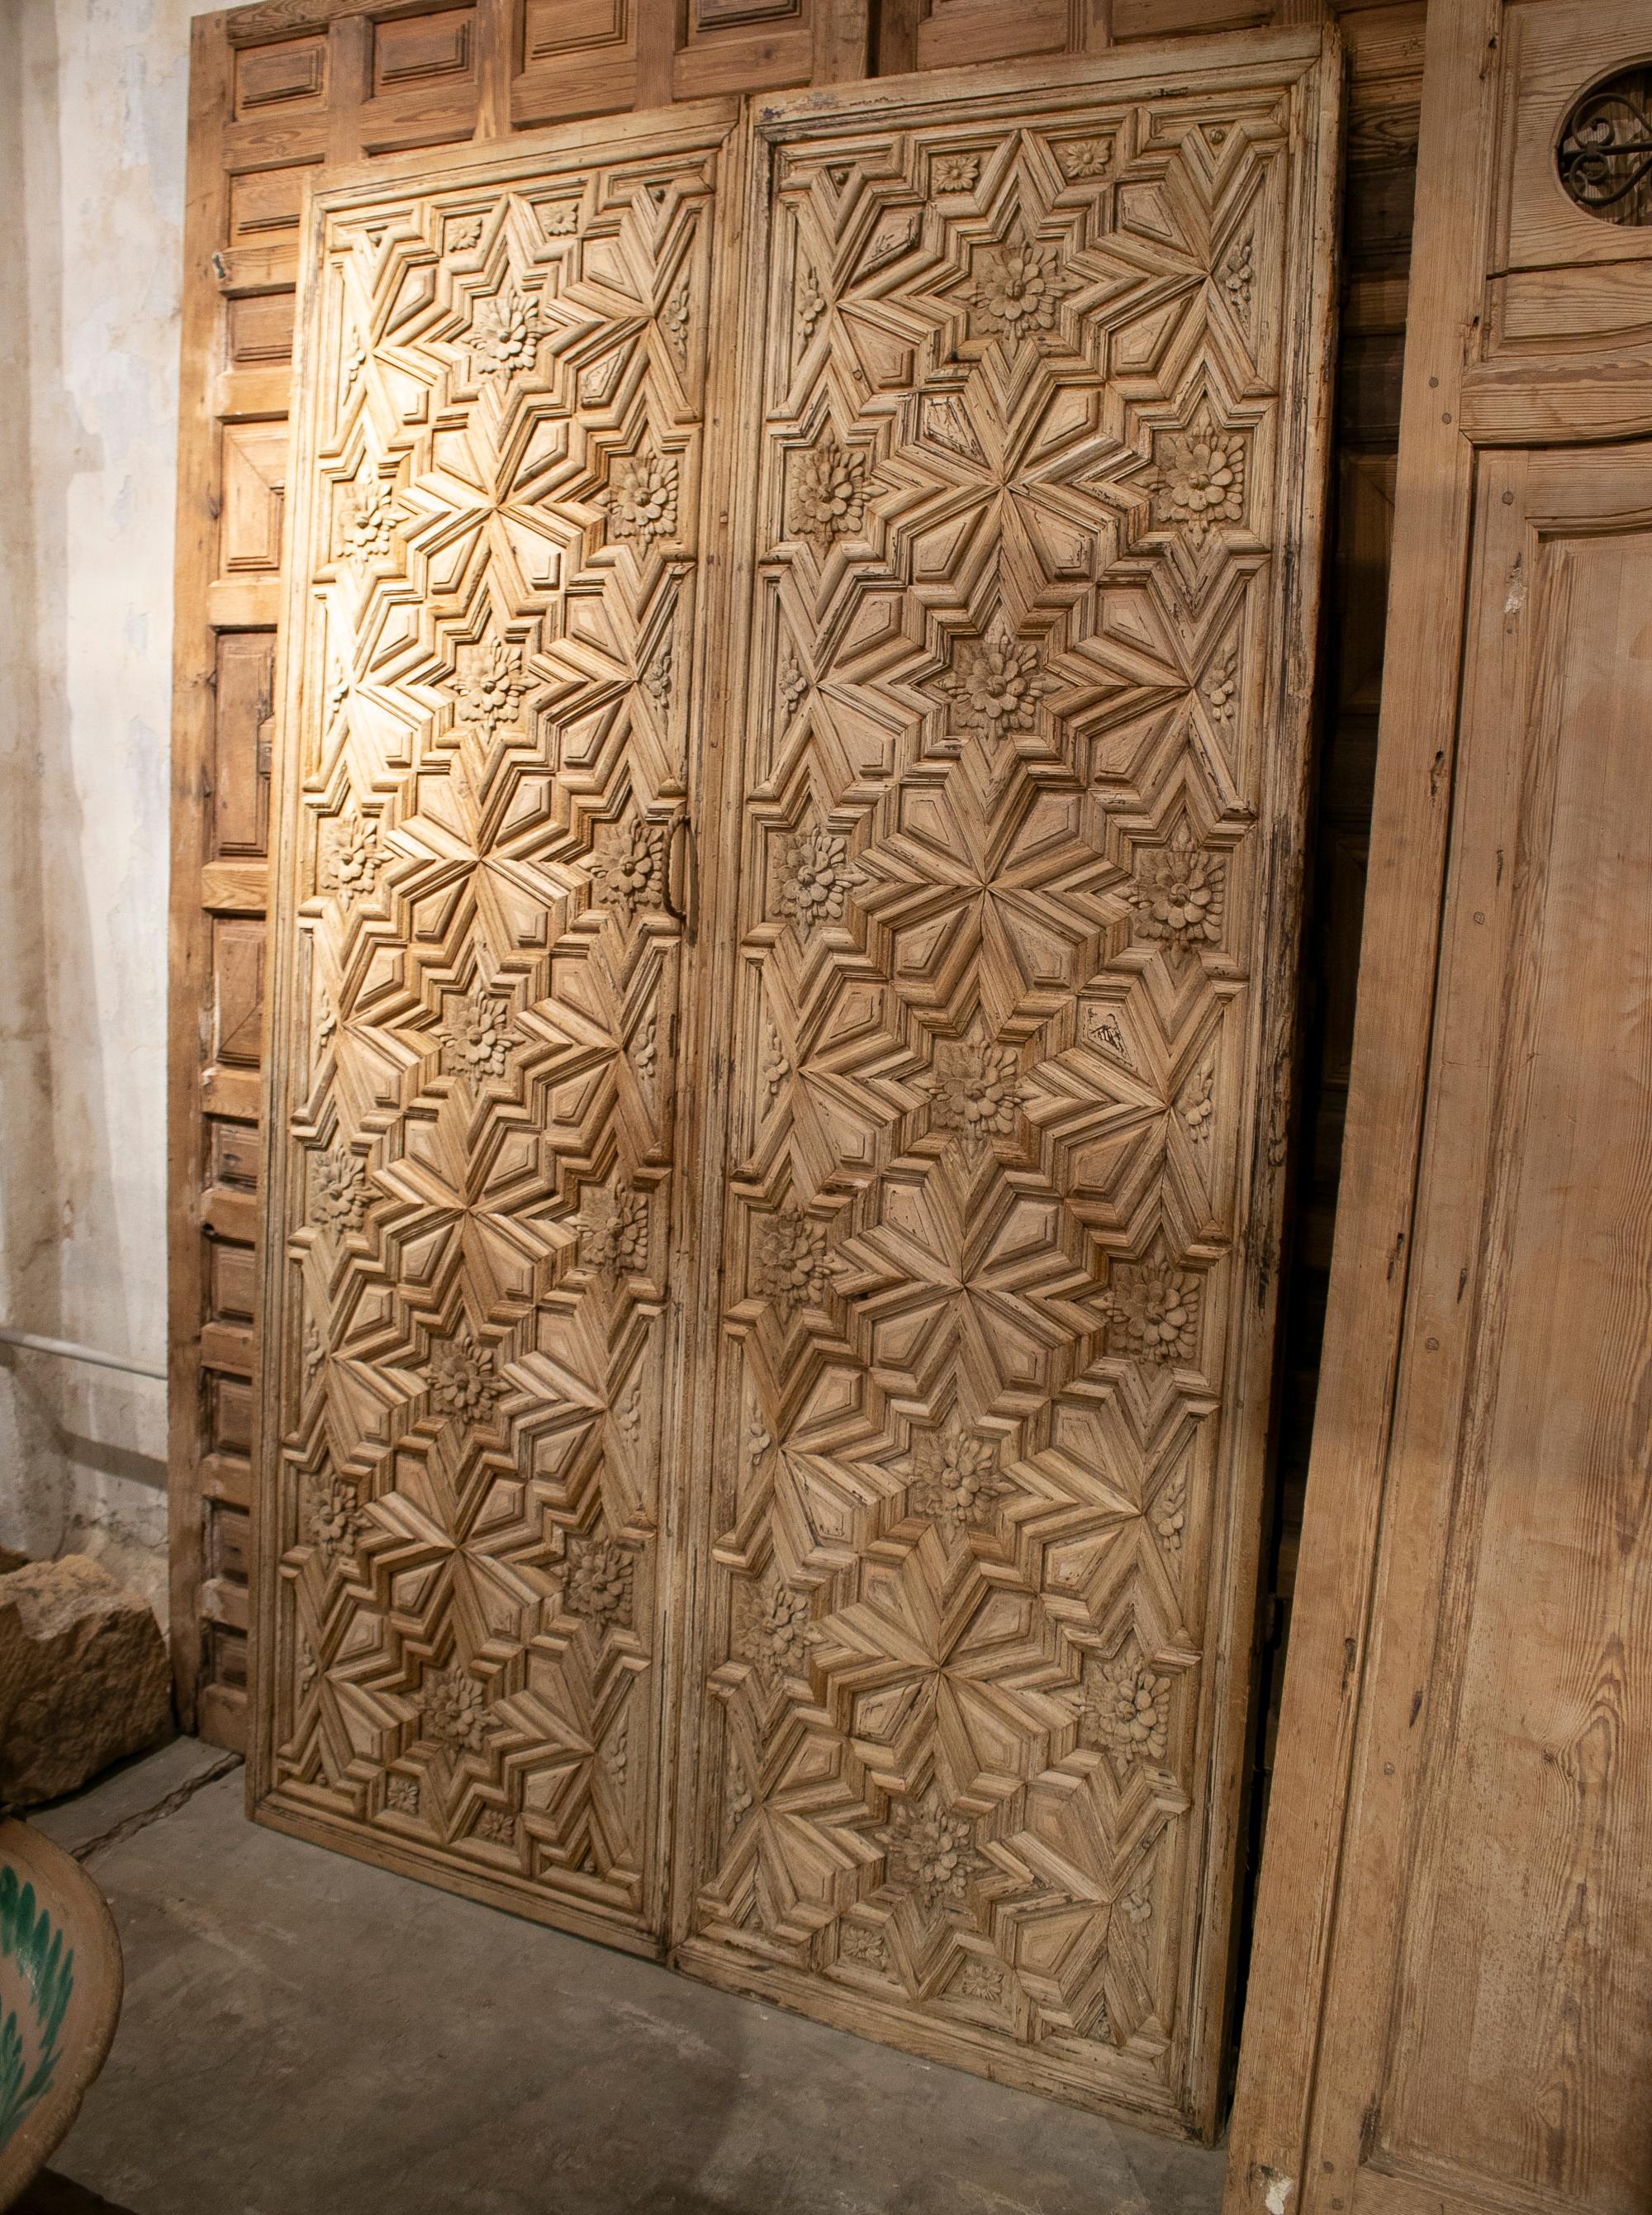 16th century Spanish lime washed hand carved wooden double door with ornate geometric and plant decoration.